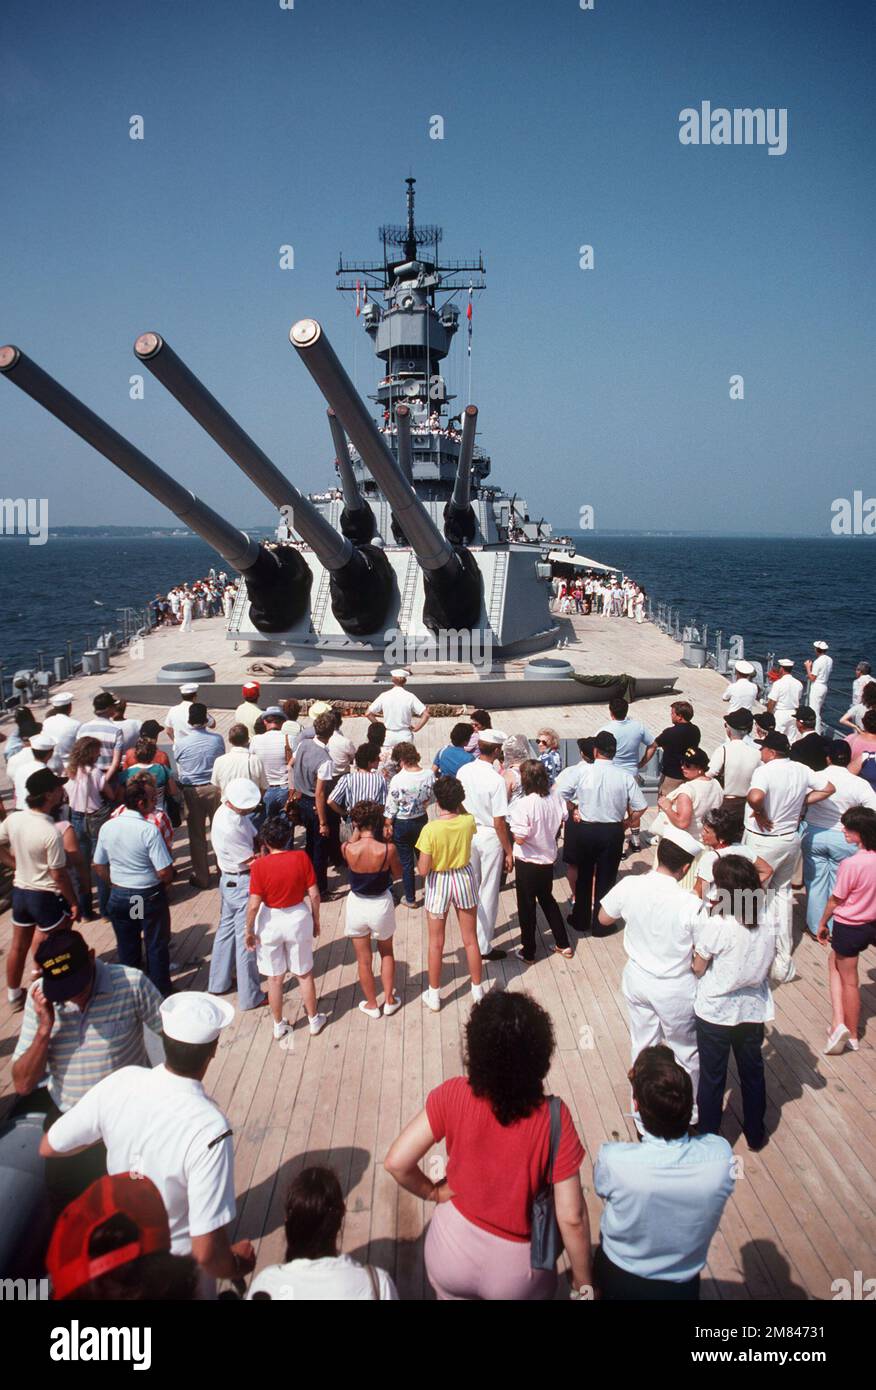 The No. 1 Mk 7 16 in. gun turret pivots as part of a demonstration given during a dependent's cruise aboard the battleship USS IOWA (BB 61). Base: USS Iowa (BB 61) Country: Atlantic Ocean (AOC) Stock Photo